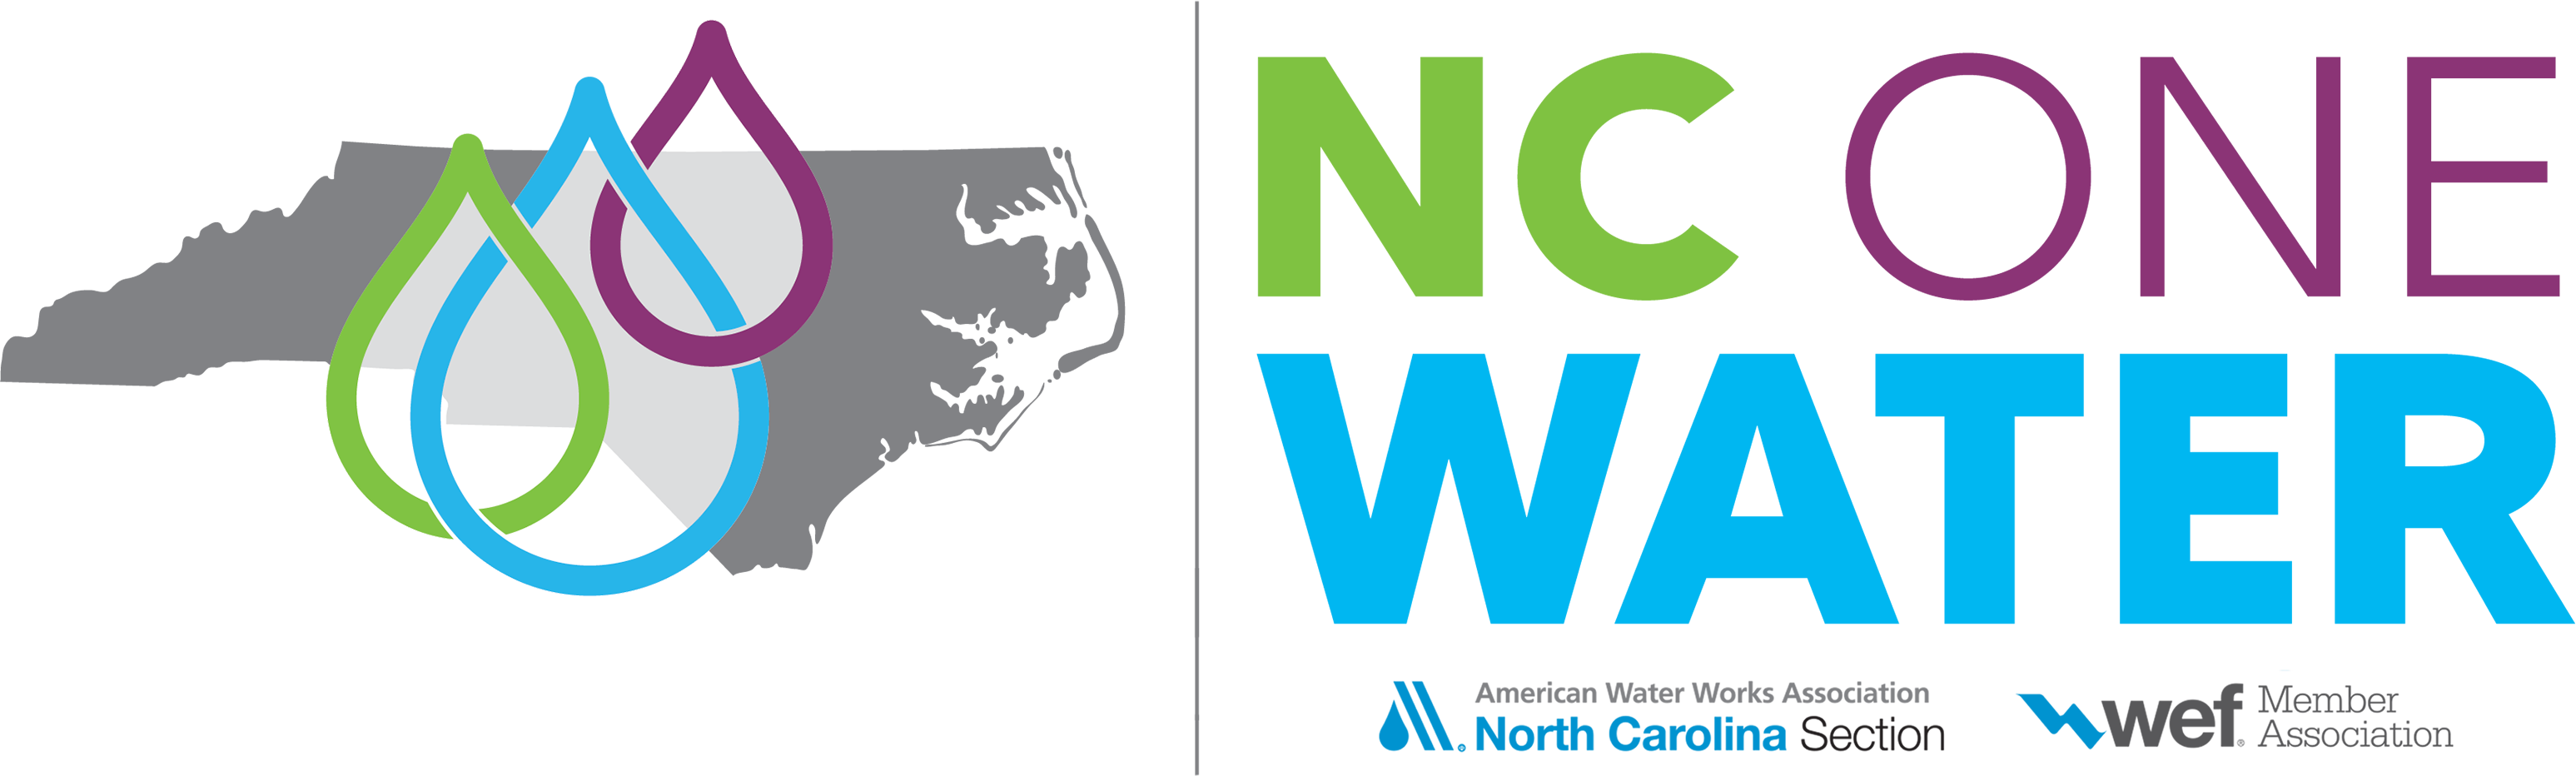 NC One Water logo.png